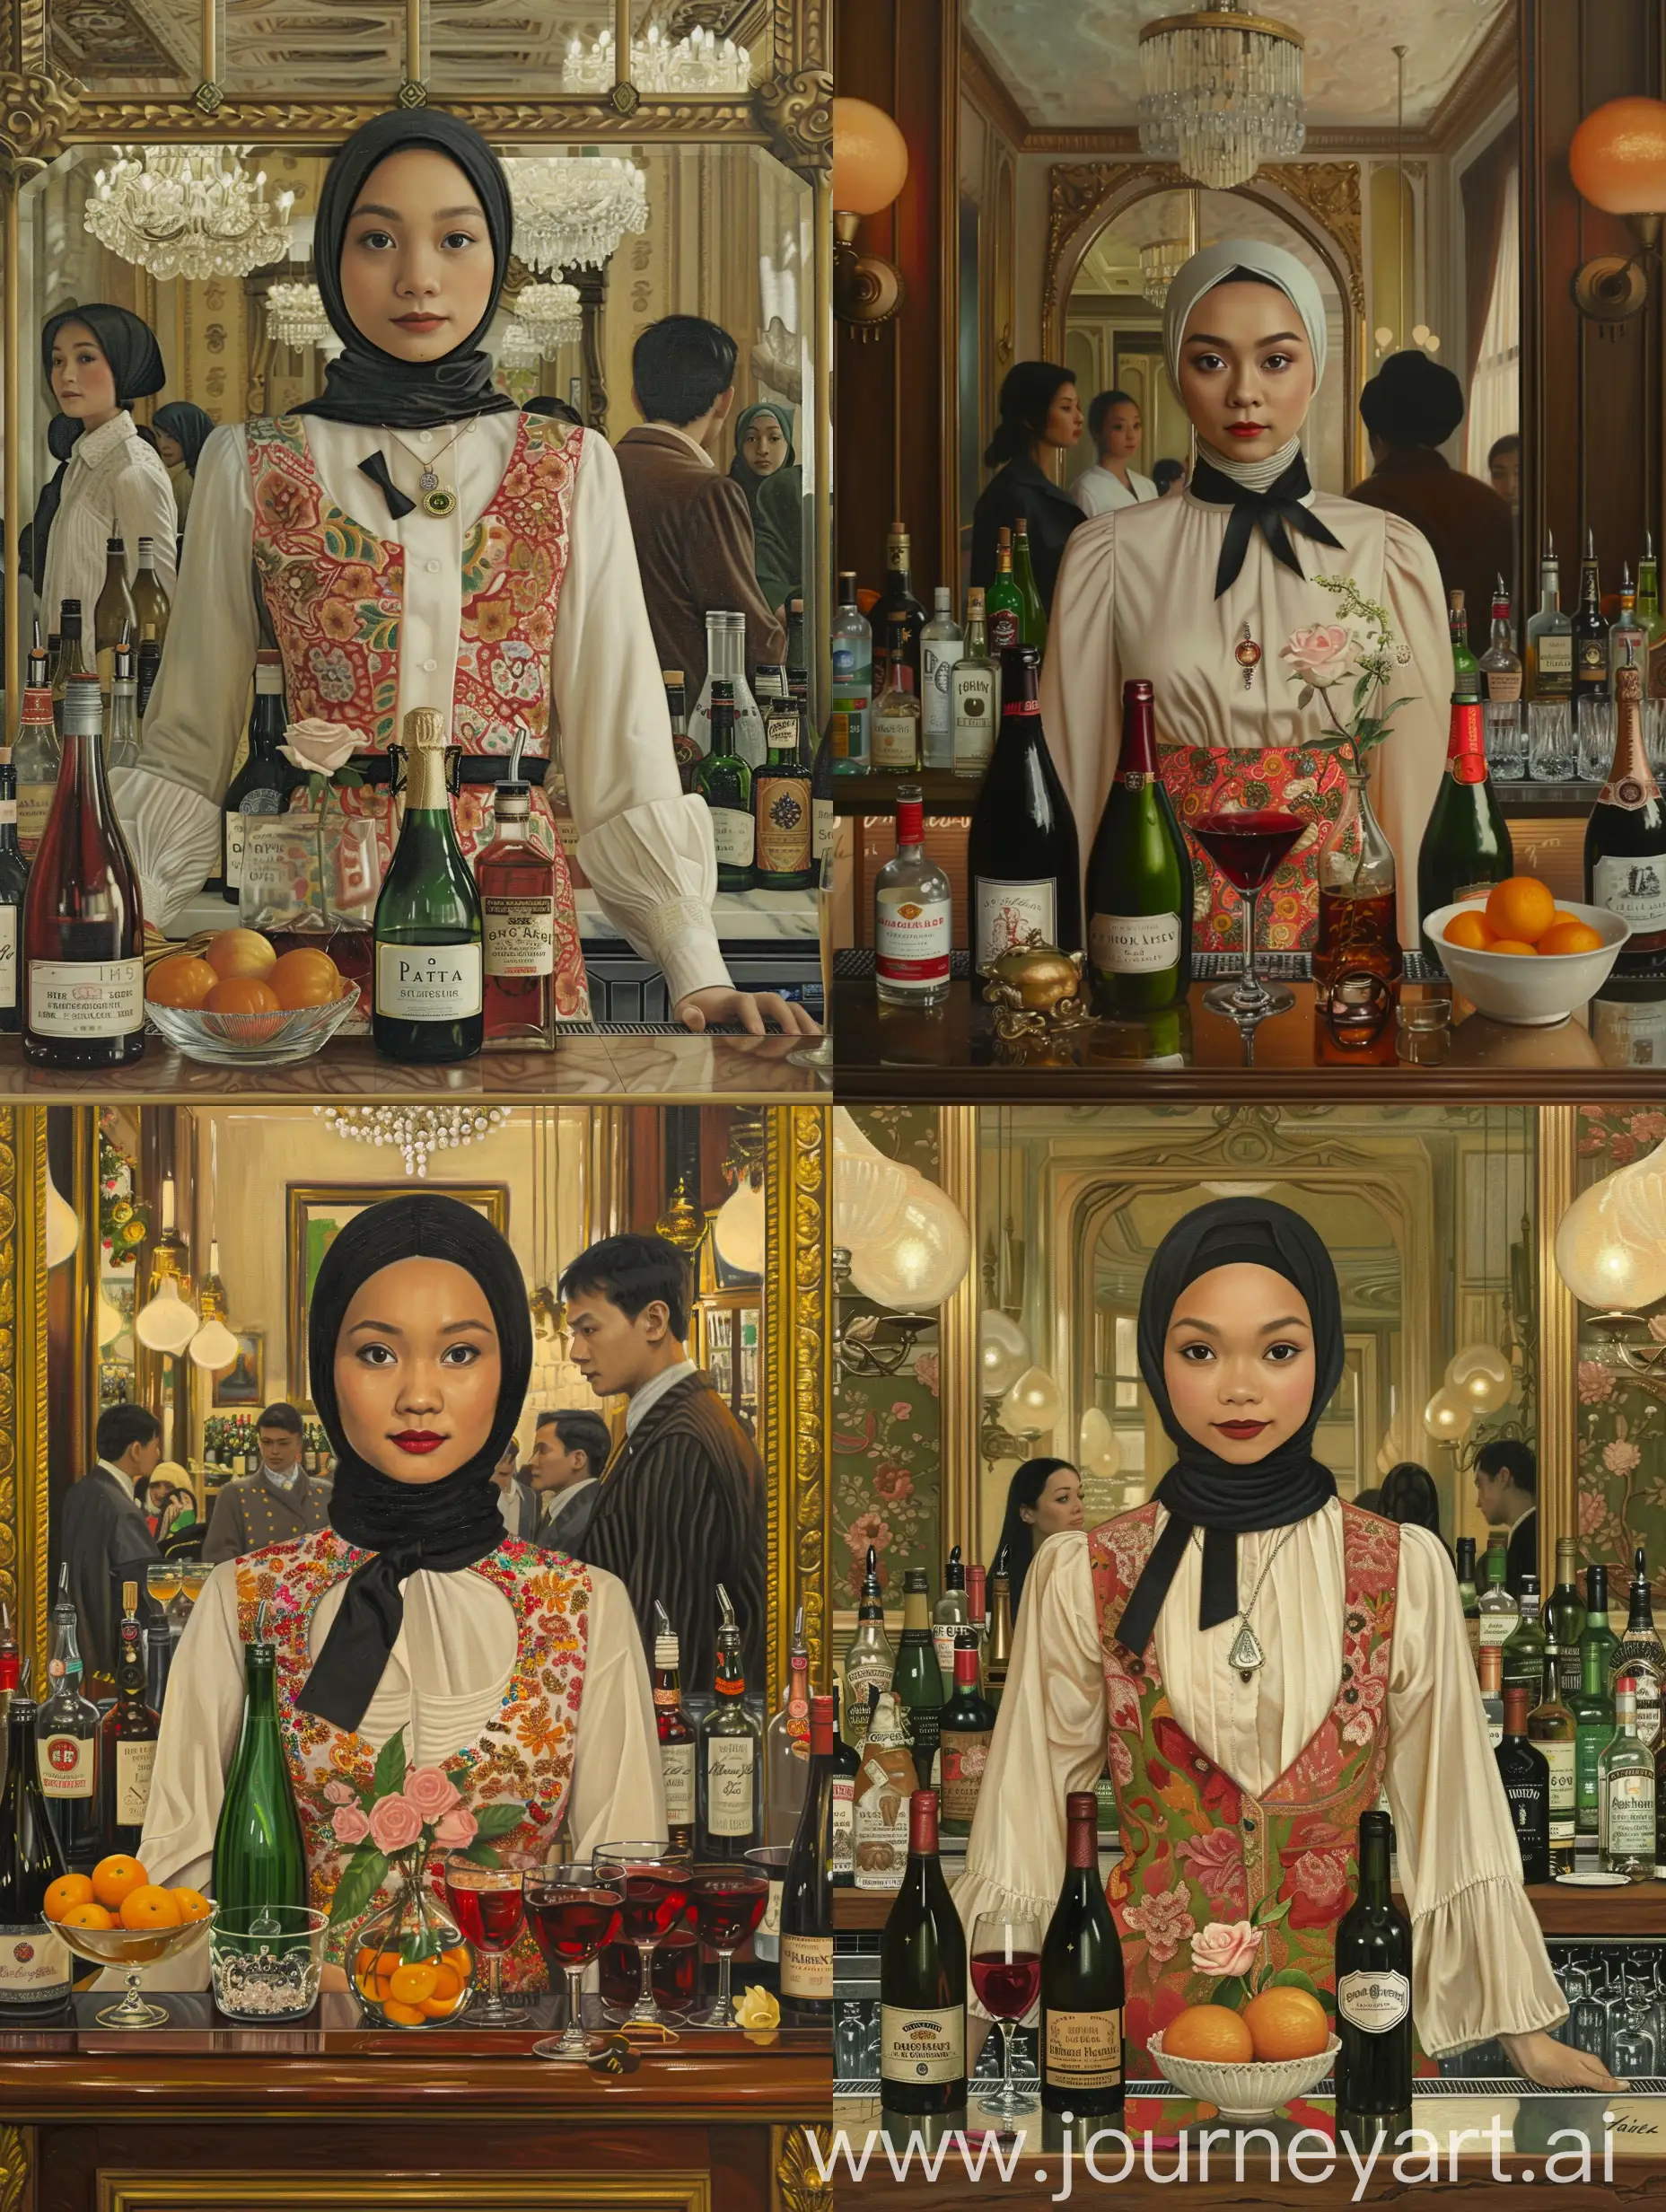 Create an intricate painting of an Indonesian hijab woman, standing directly behind a bar counter, early Impressionist style. Capture them in the center of the frame, with a neutral expression and a direct gaze at the viewer. Include intricate details: a bright fashion dress with a white blouse, a black ribbon tied at the collar, and a pendant necklace. On the bar, picture assorted bottles of red wine and champagne, a bowl of oranges, a glass vase with a sprig of pale pink roses, and a bottle of green absinthe. Their subtle reflections in the mirror behind the bar, along with the blurry figures of the patrons against the dimly lit backdrop, give the impression of a bustling Parisian cafe. Use a palette of muted earth tones with gold accents and soft lighting, to convey mood lighting in the room reflected off the glass and polished wood by Faiza Maghni art by Yayoi Kusama art by National Geographic art